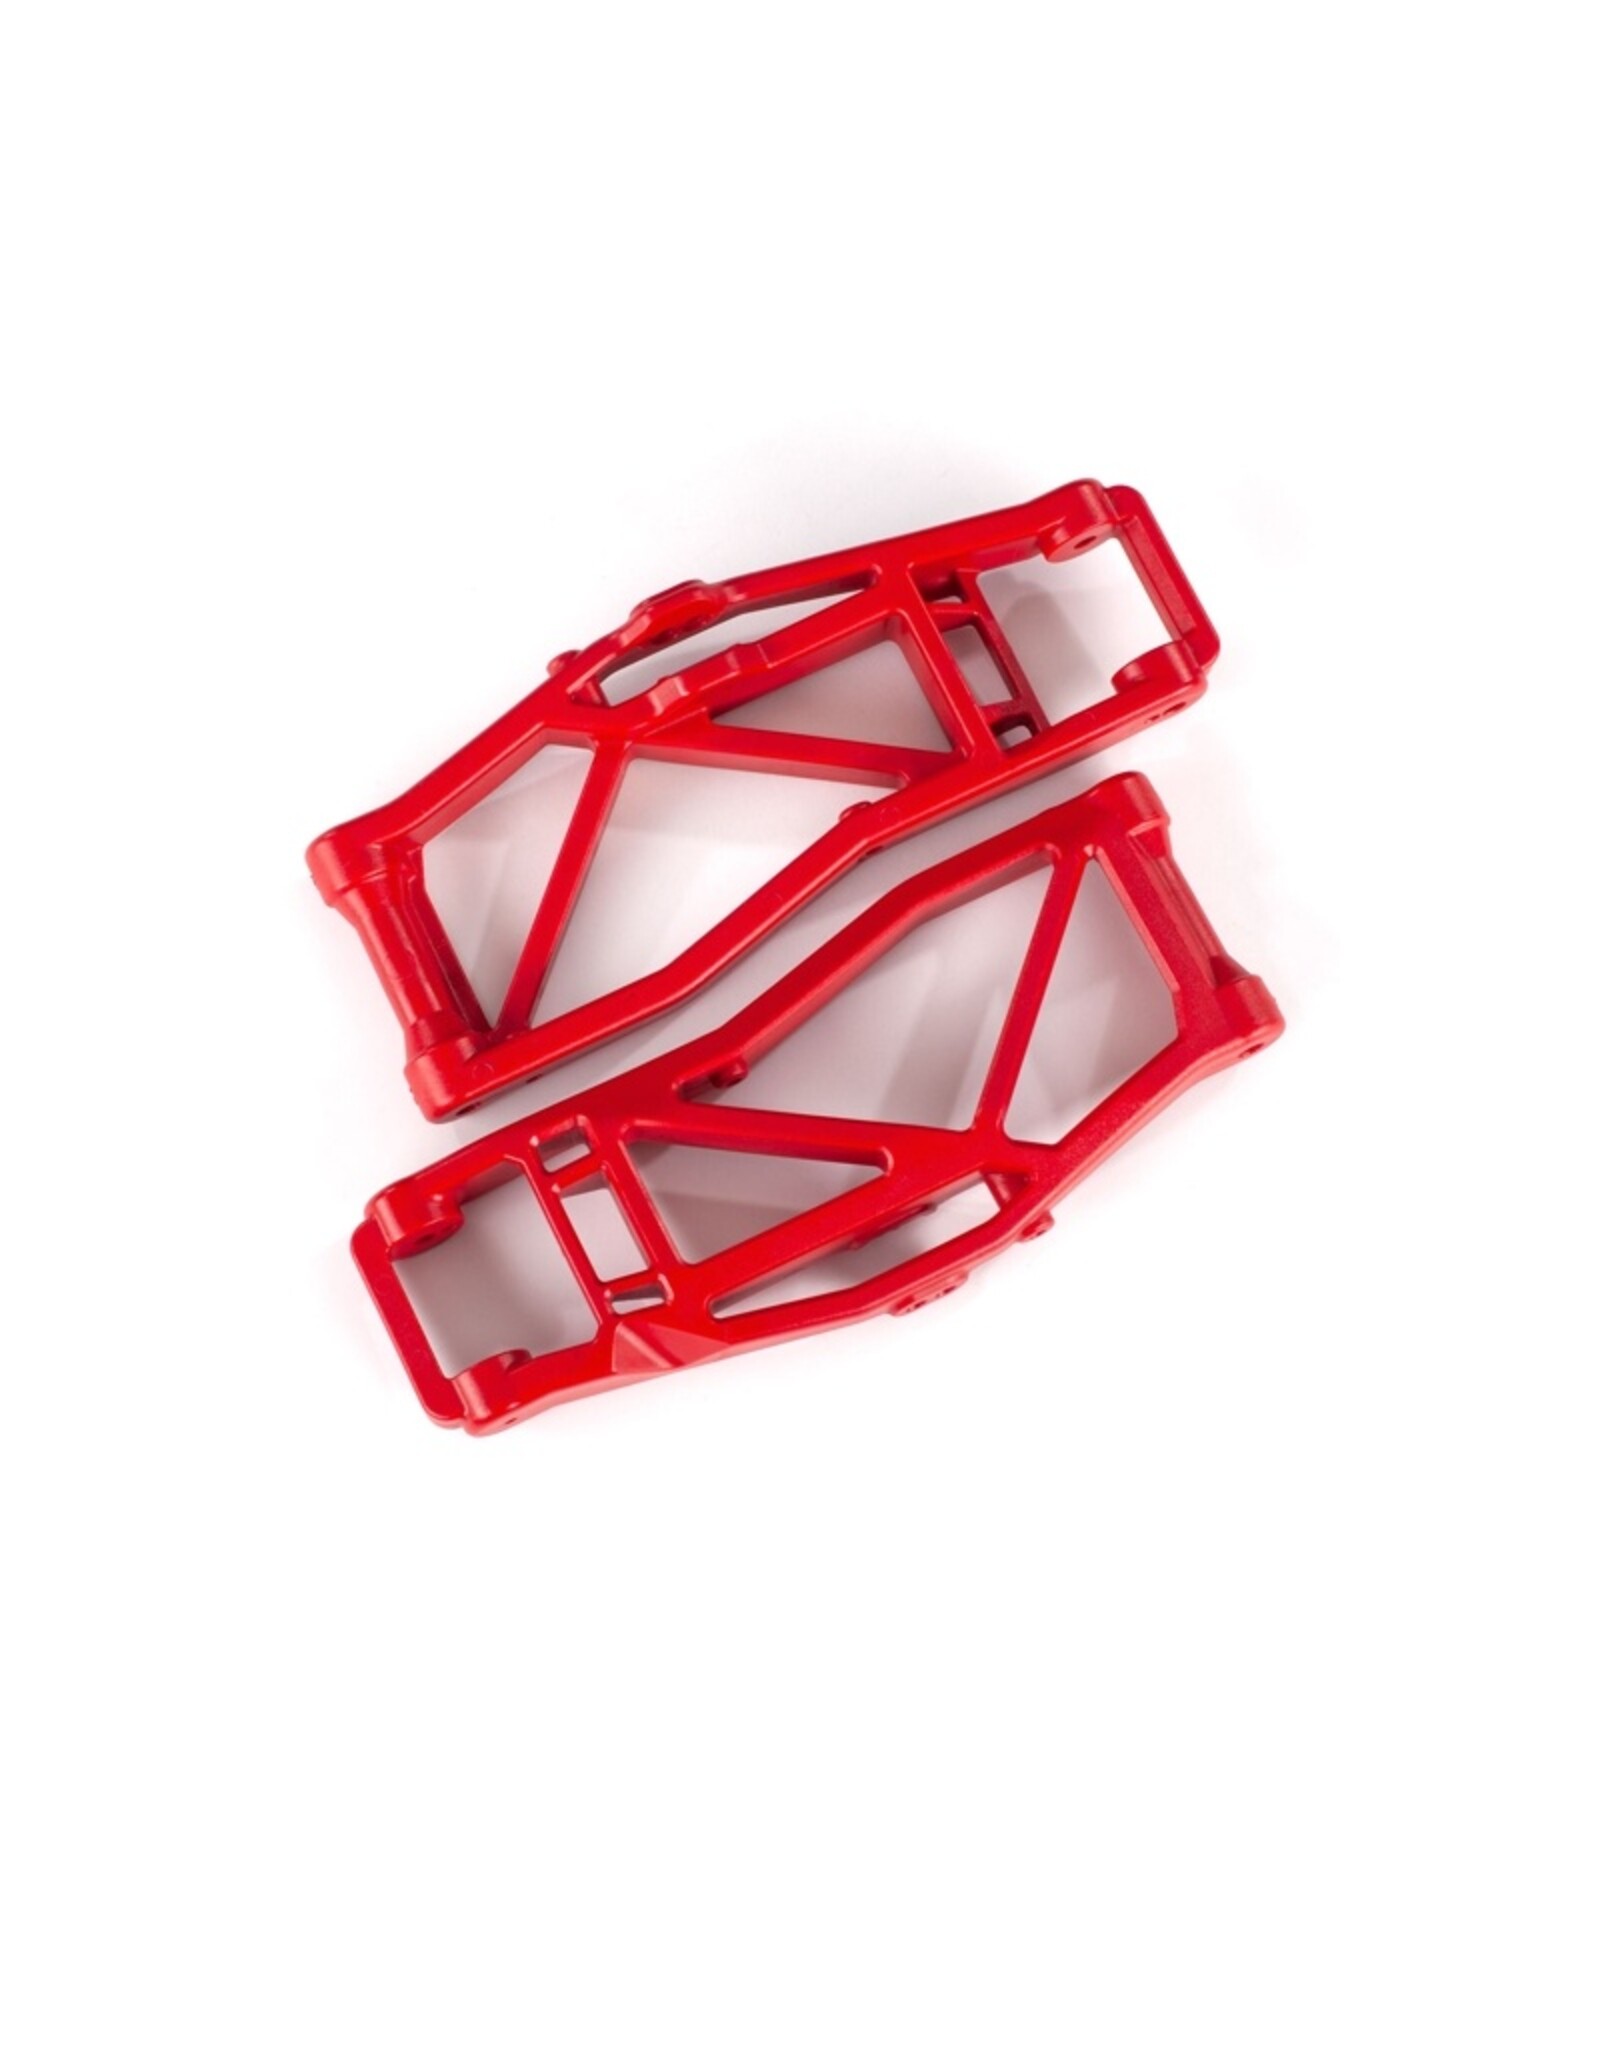 Traxxas TRA8999R  SUSPENSION ARMS, LOWER, RED